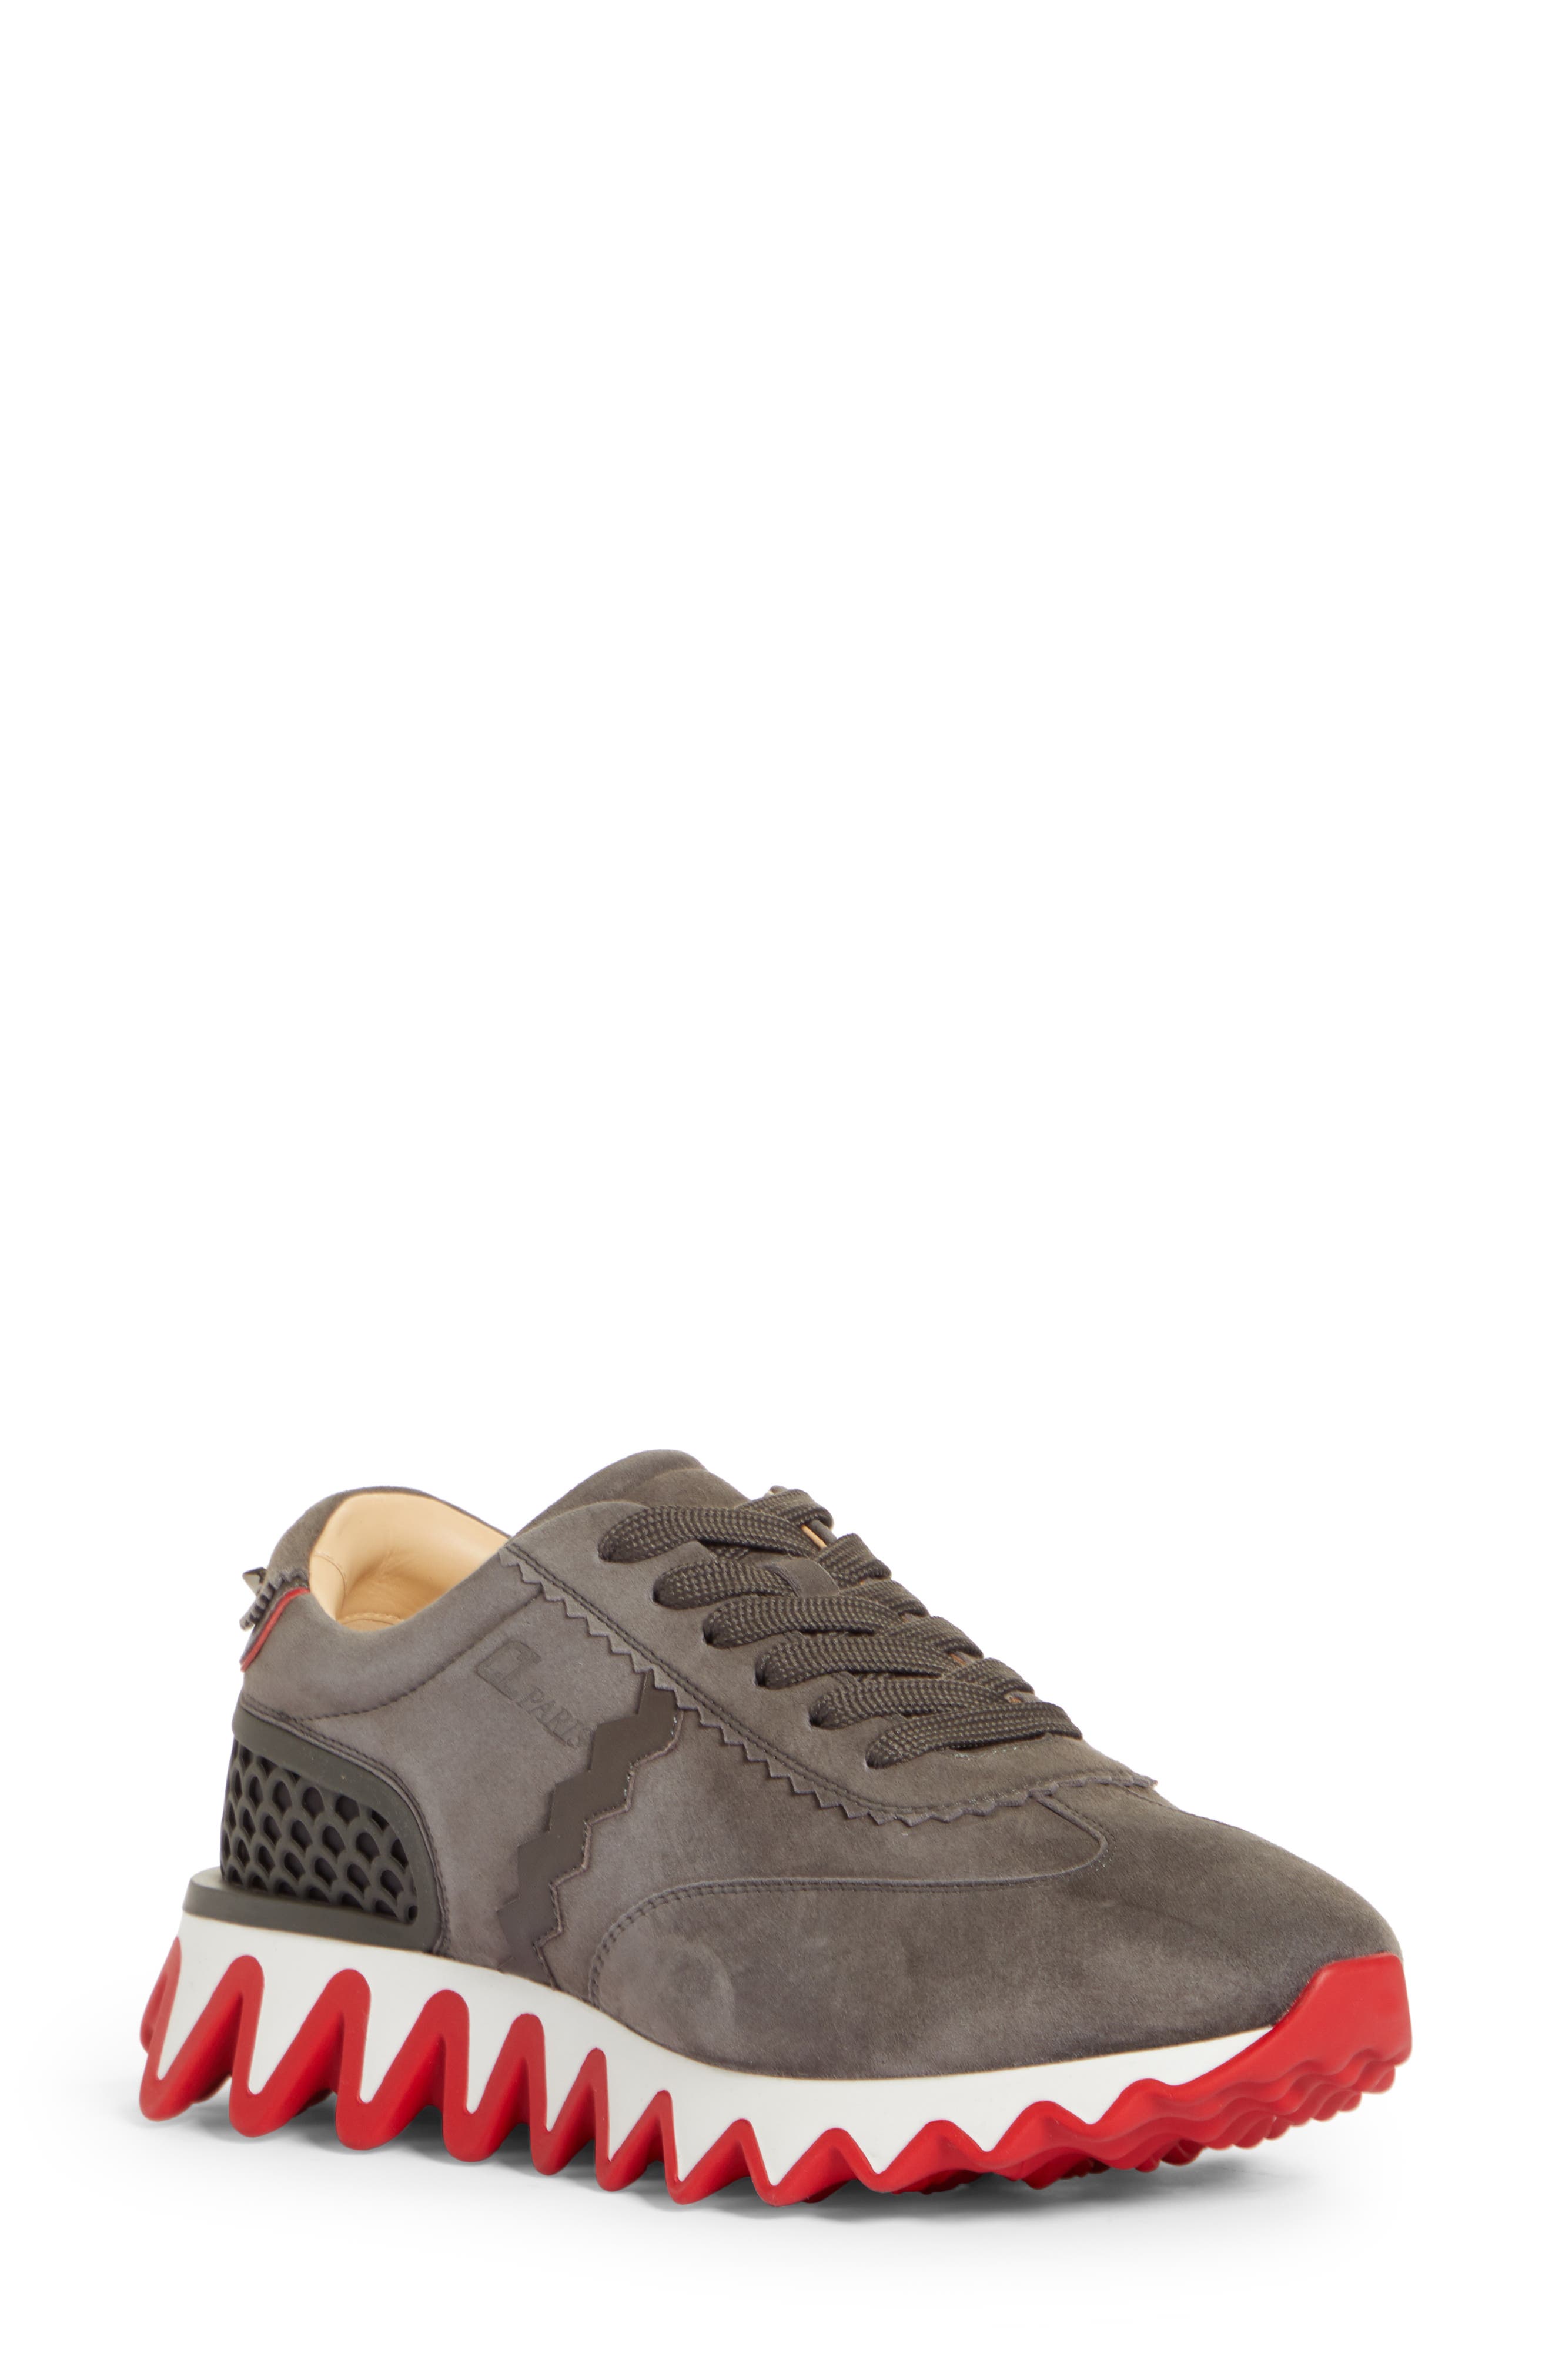 Christian Louboutin Loubishark Suede Low-top Sneakers in Black for